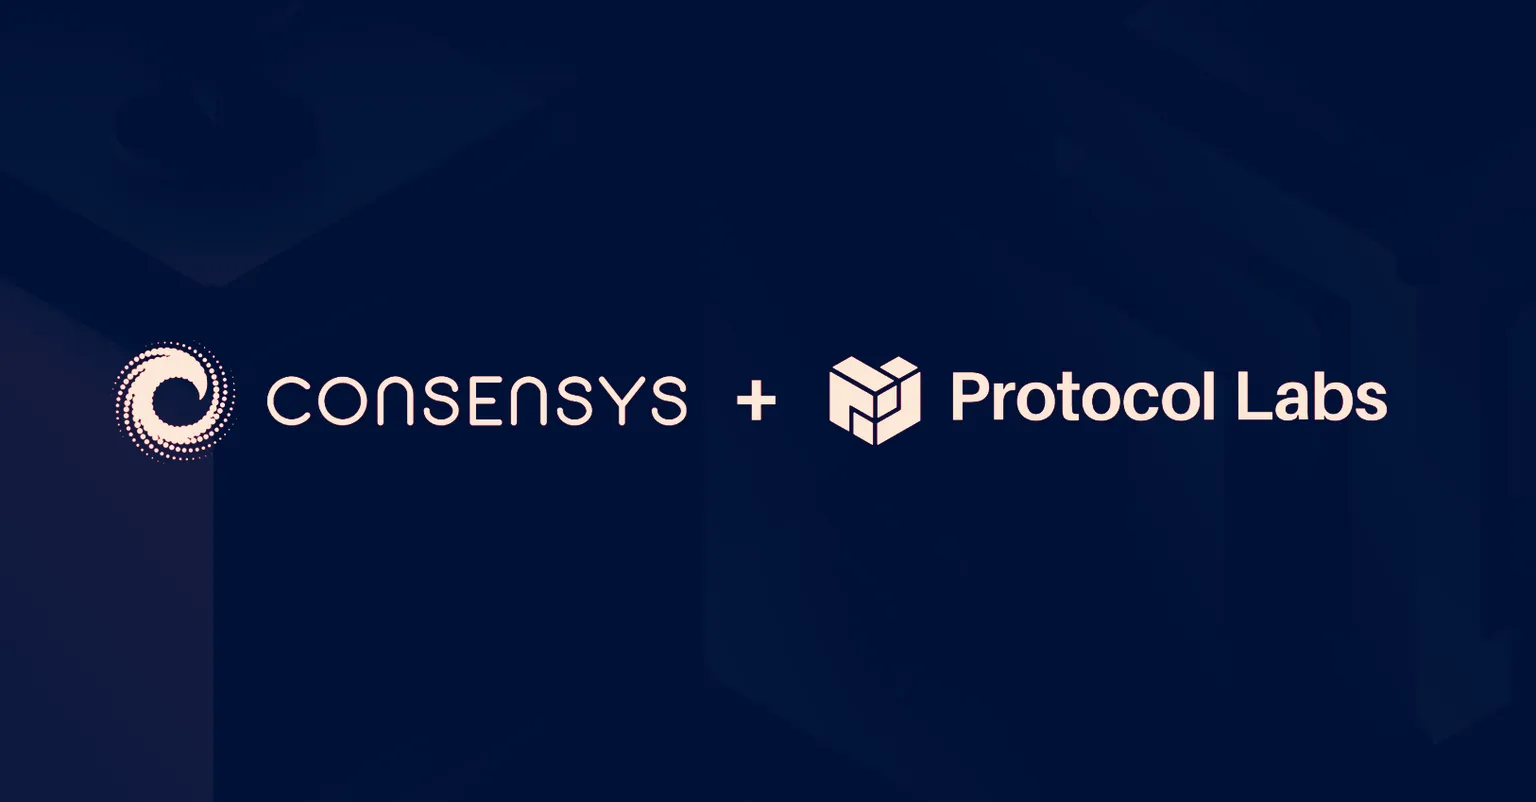 ConsenSys and Filecoin working together. Image: ConsenSys